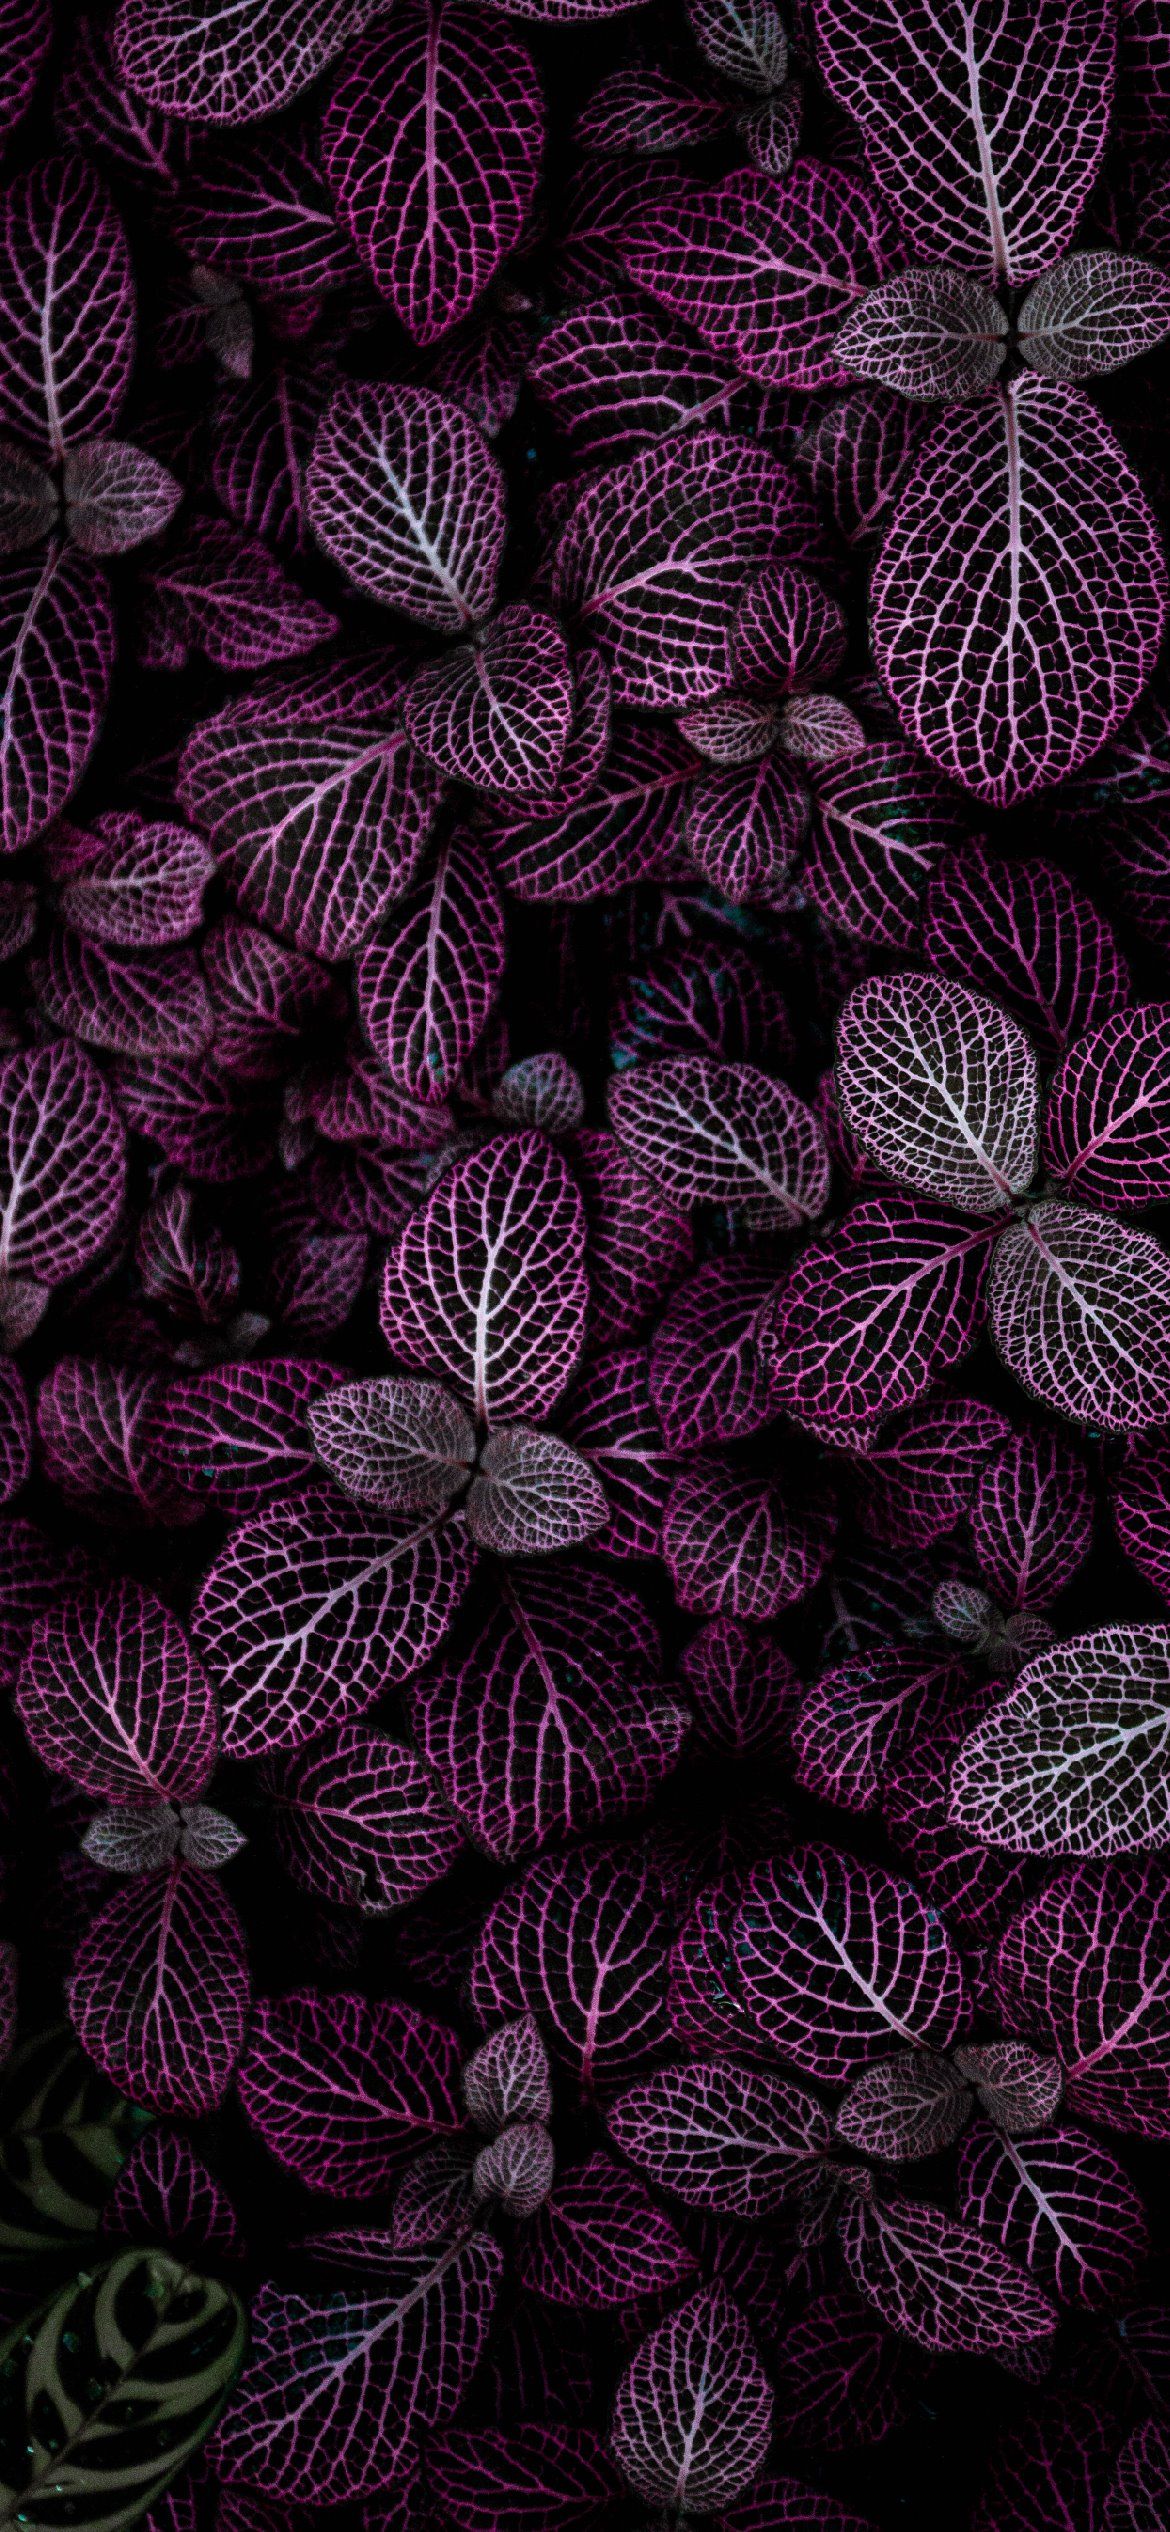 A close up of some purple leaves - Dark purple